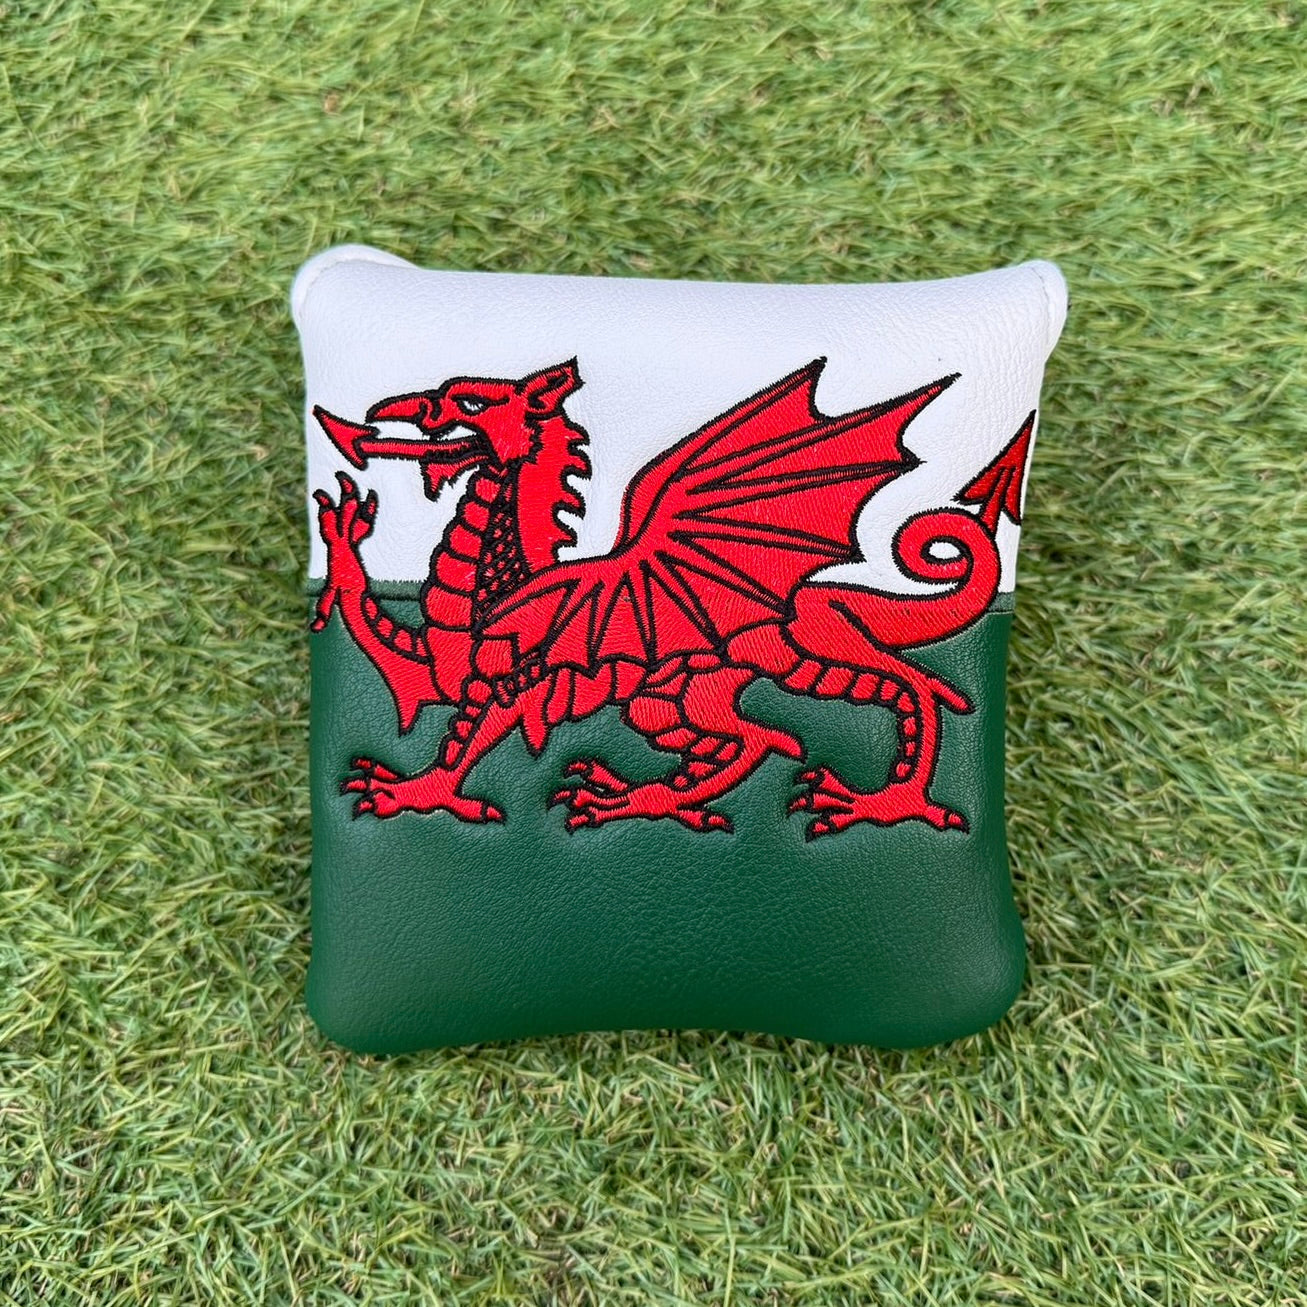 Wales Golf Cover